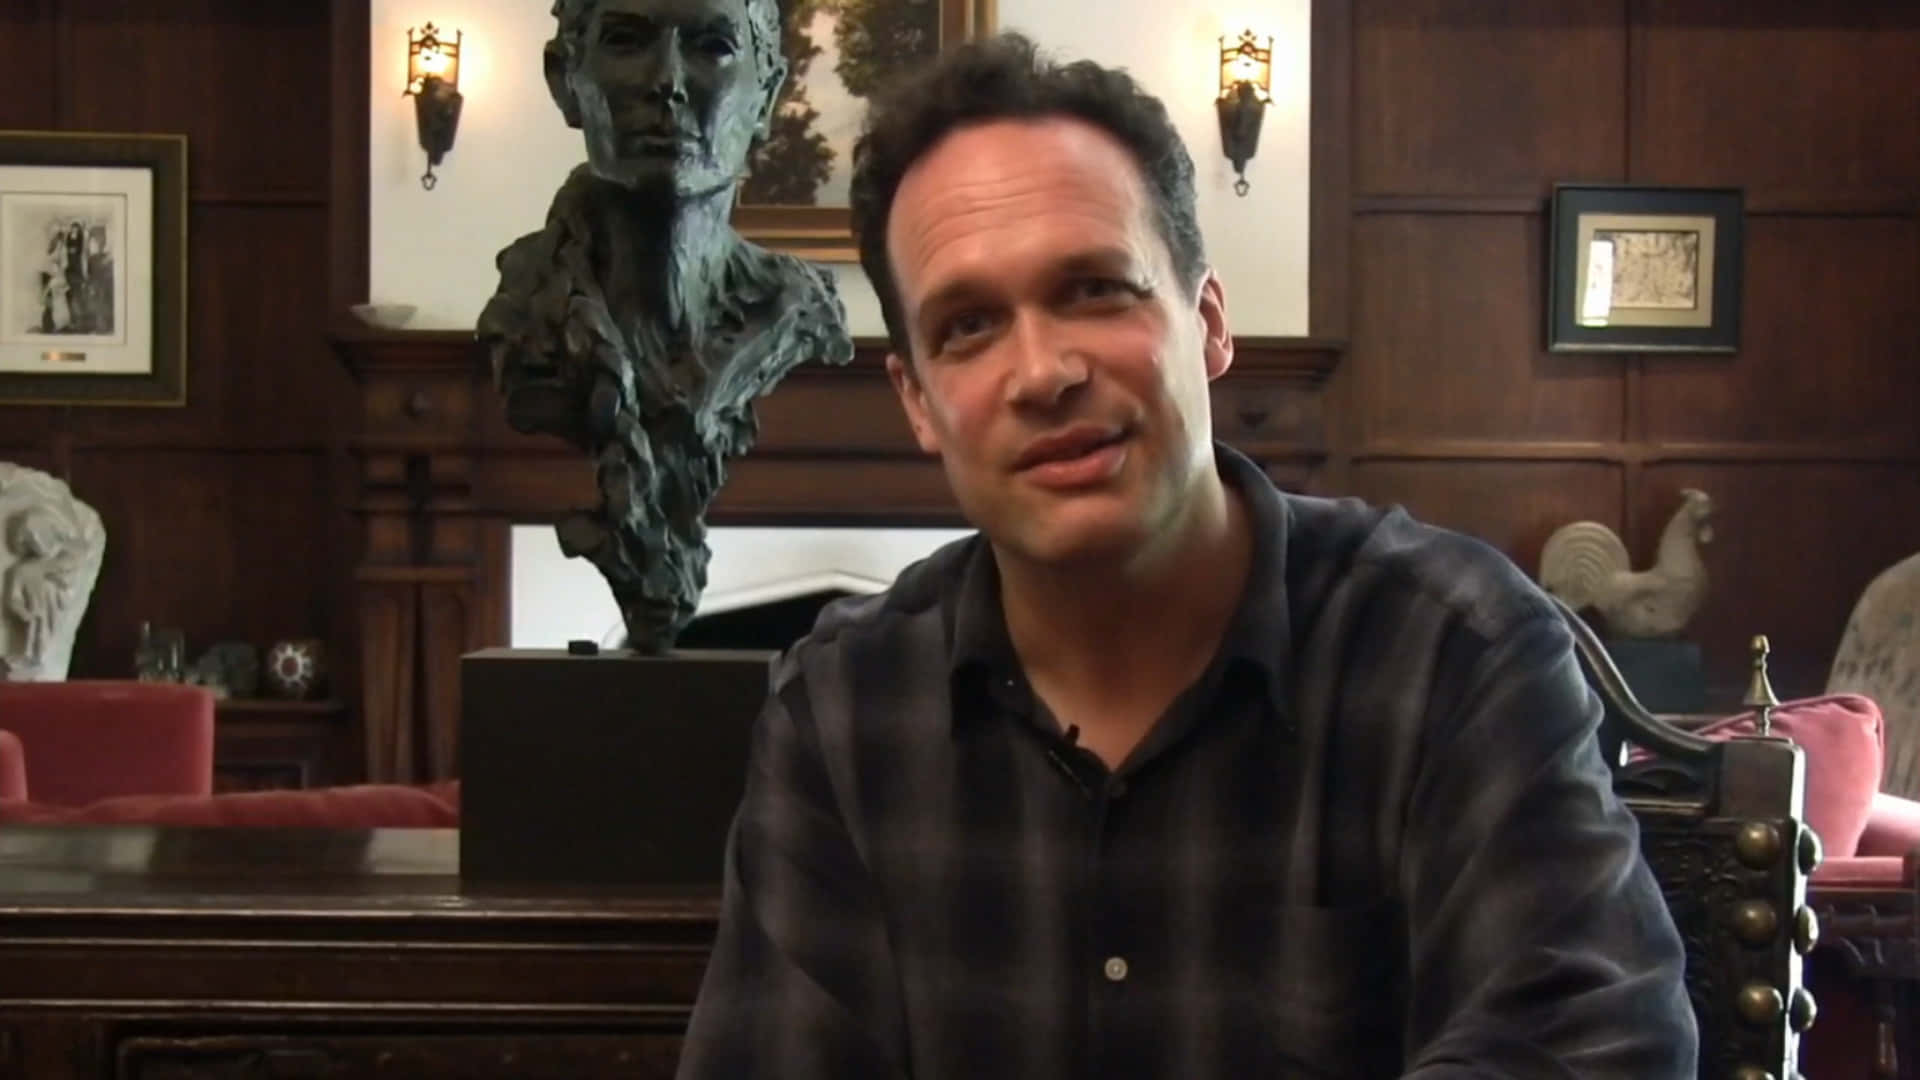 Enjoying a Laughing Moment with Diedrich Bader" Wallpaper